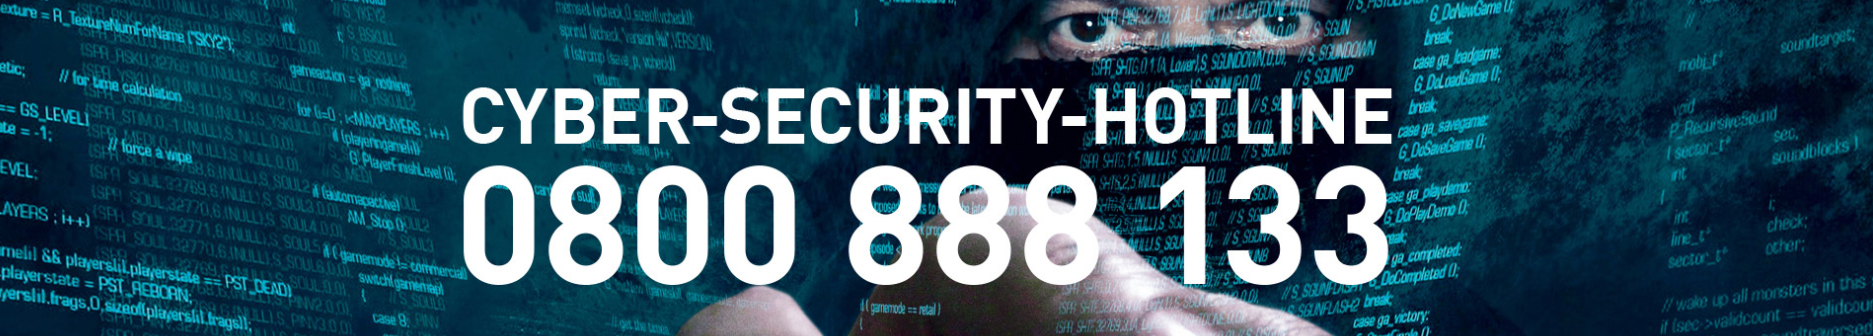 Cyber-Security-Hotline 0800 888 133